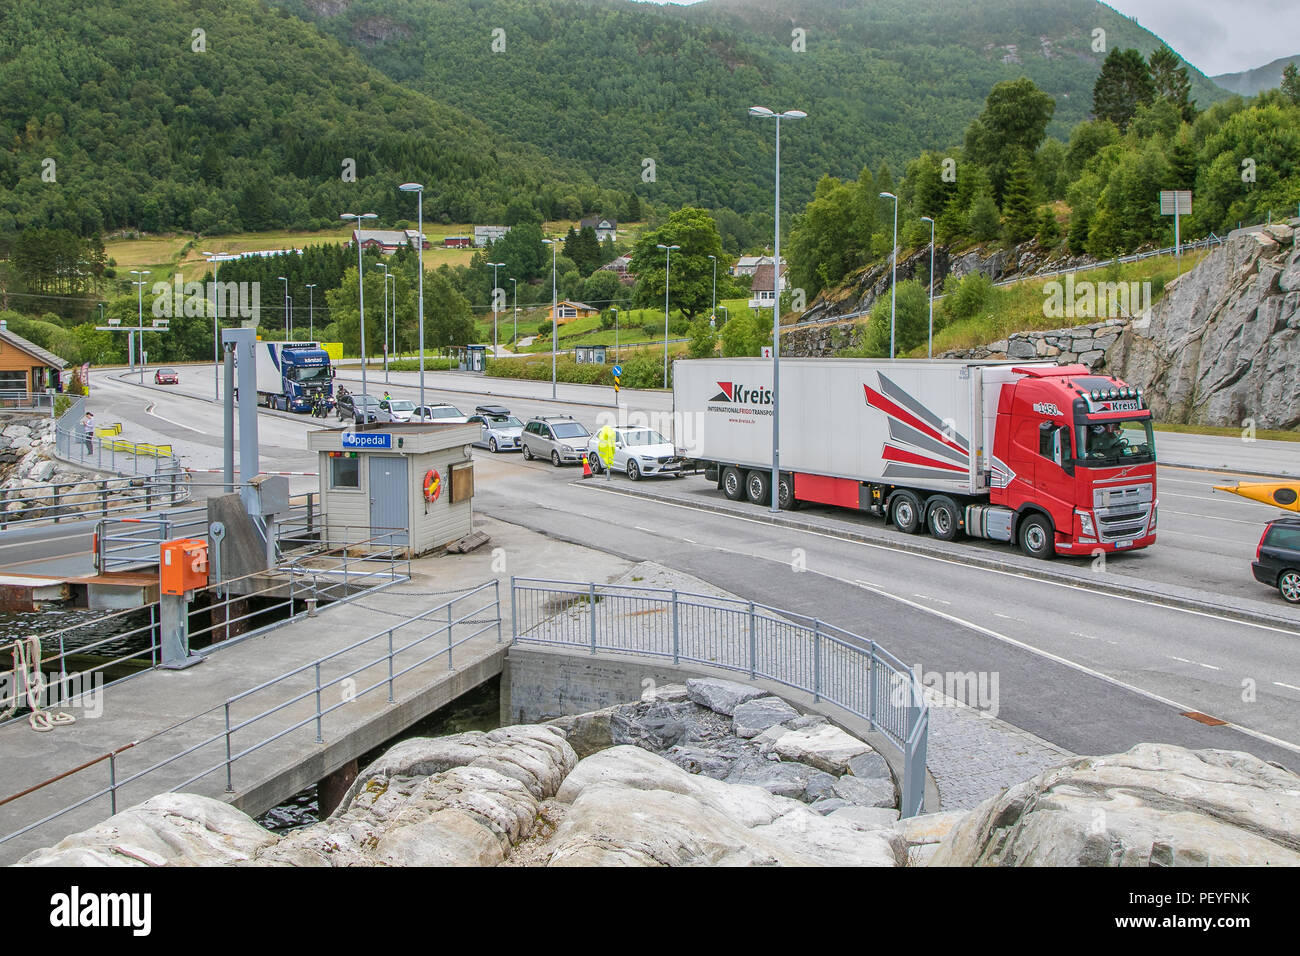 Oppedal, Norway, July 23, 2018: Cars and trucks stand in line to board a ferry boat that will bring them across a fjord. Stock Photo